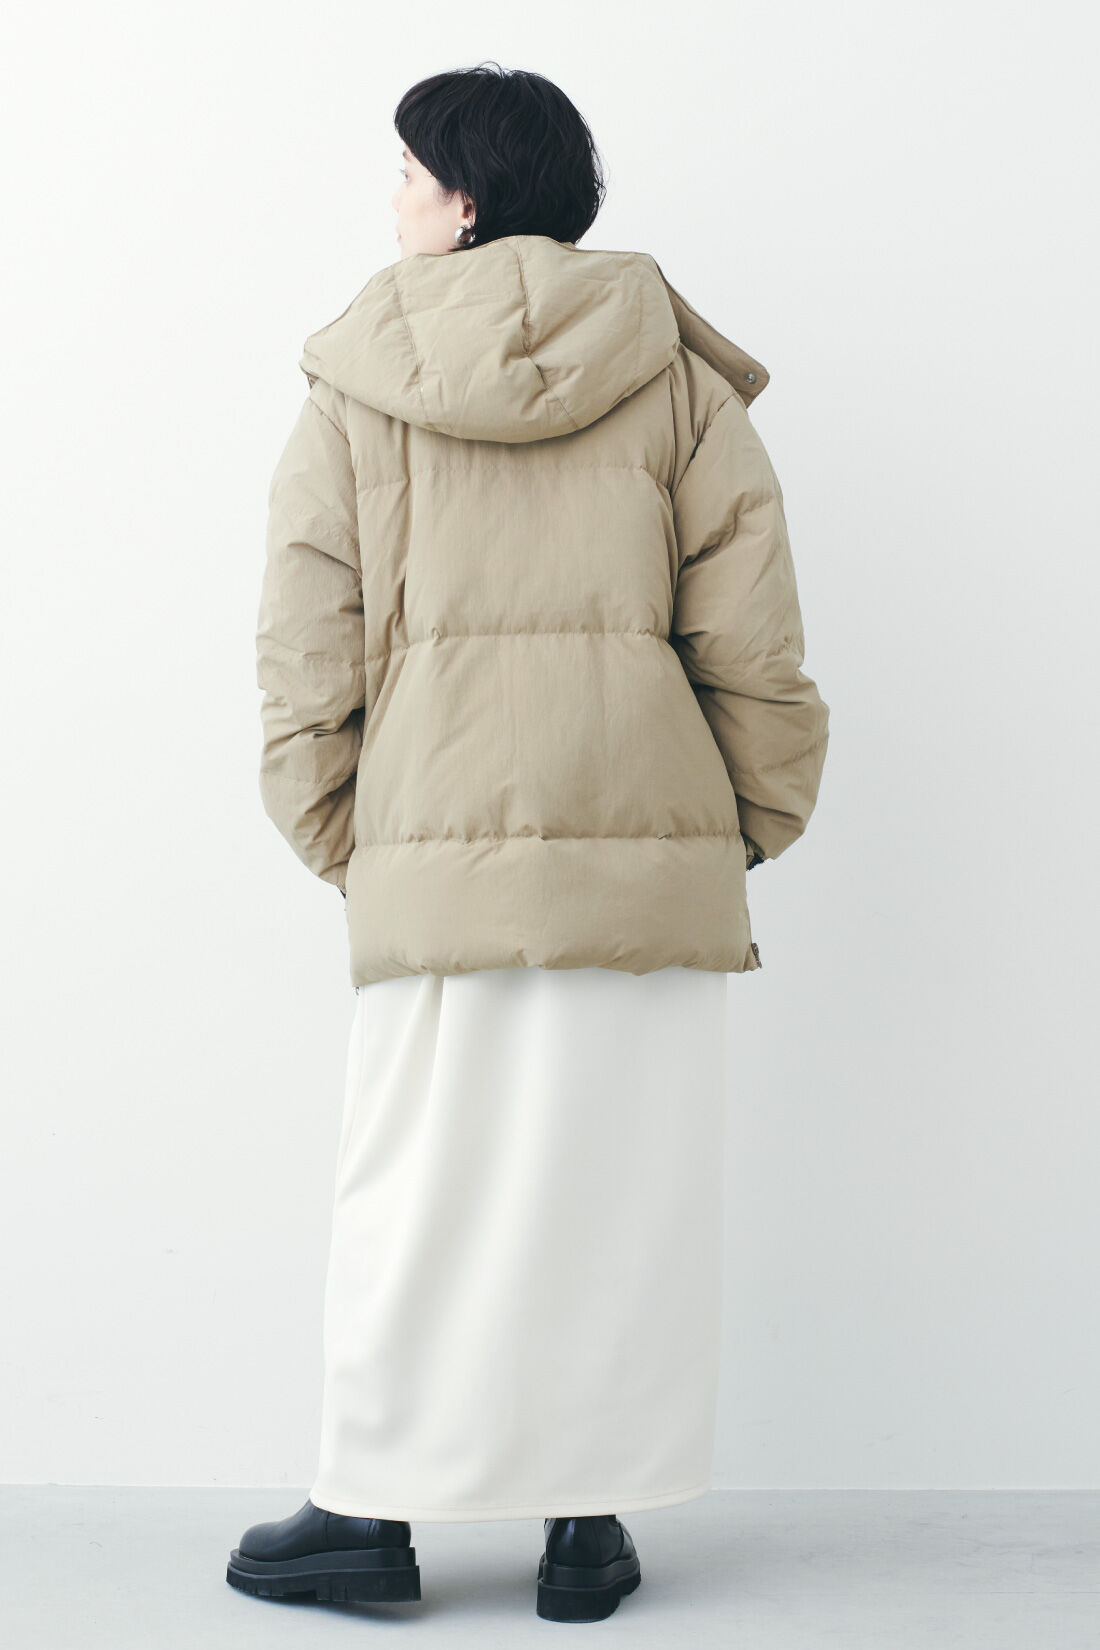 Real Stock|MEDE19F 〈SELECT〉 GERRY BASIC DOWN JACKET|1：BEIGE　モデル身長：157cm